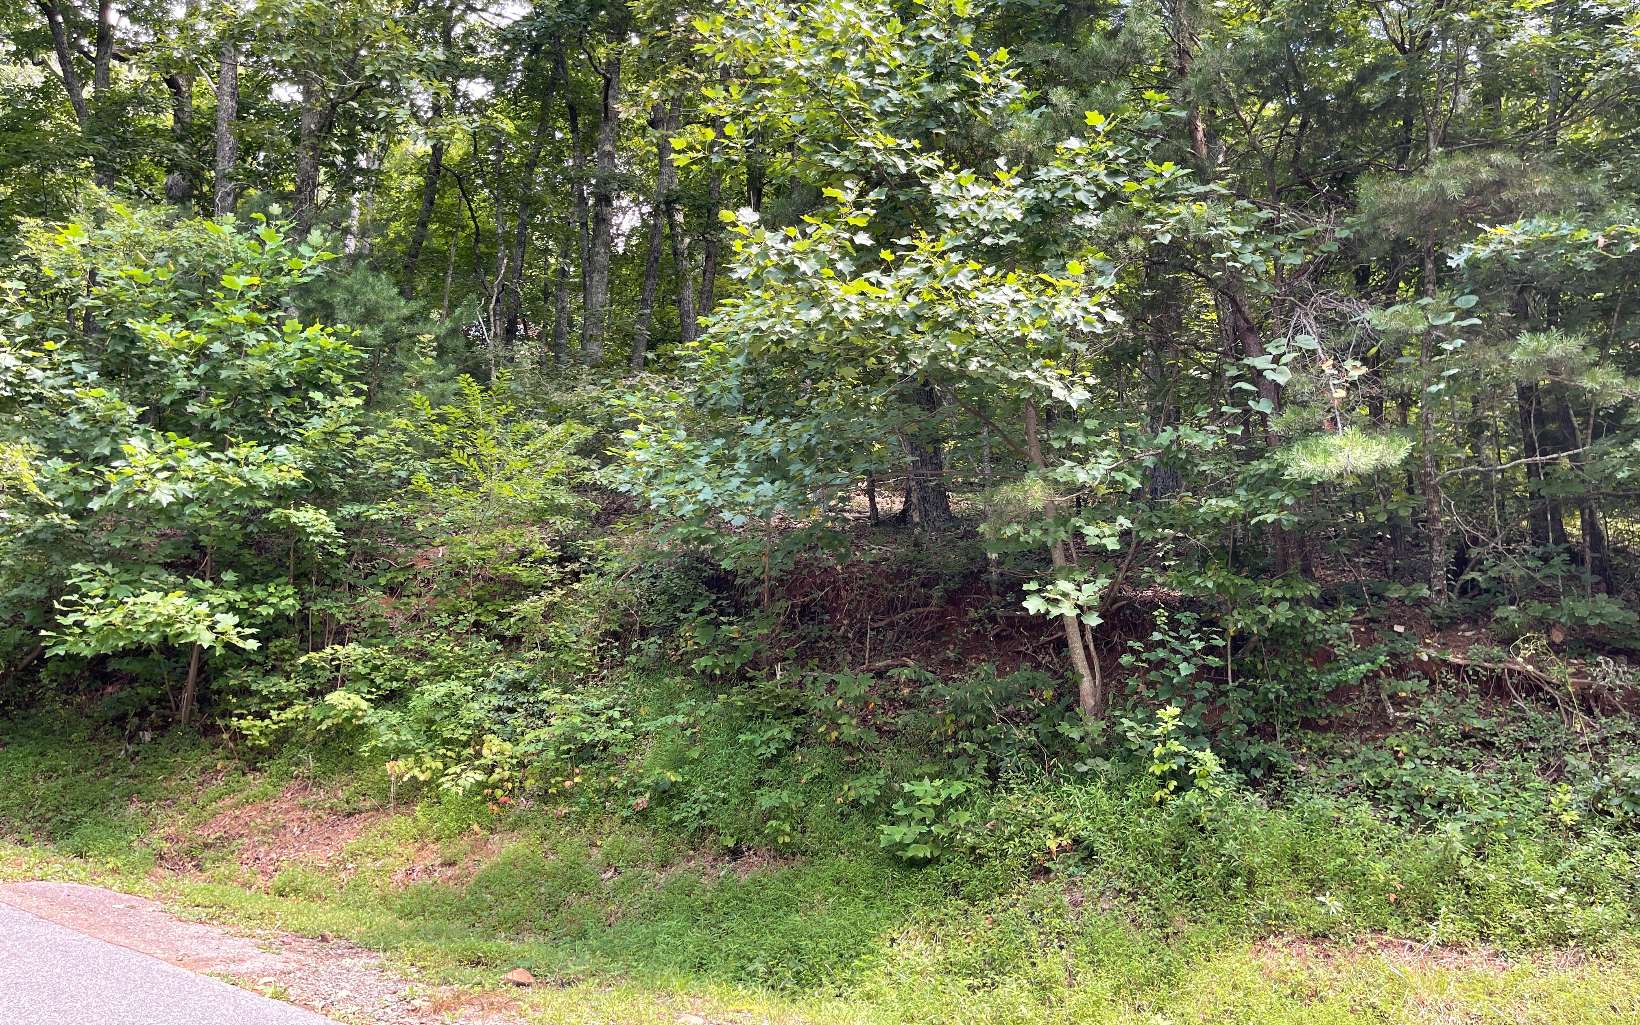 Looking for the perfect lot to build your little mountain getaway? With building restrictions requiring a minimum of only 800 sf, this is it! This 0.68 acre lot is located in the heart of downtown Hiawassee, near dining & shopping as well as Lake Chatuge. Beautiful views overlooking town, with the mountains in the background. Lot 7 also available.